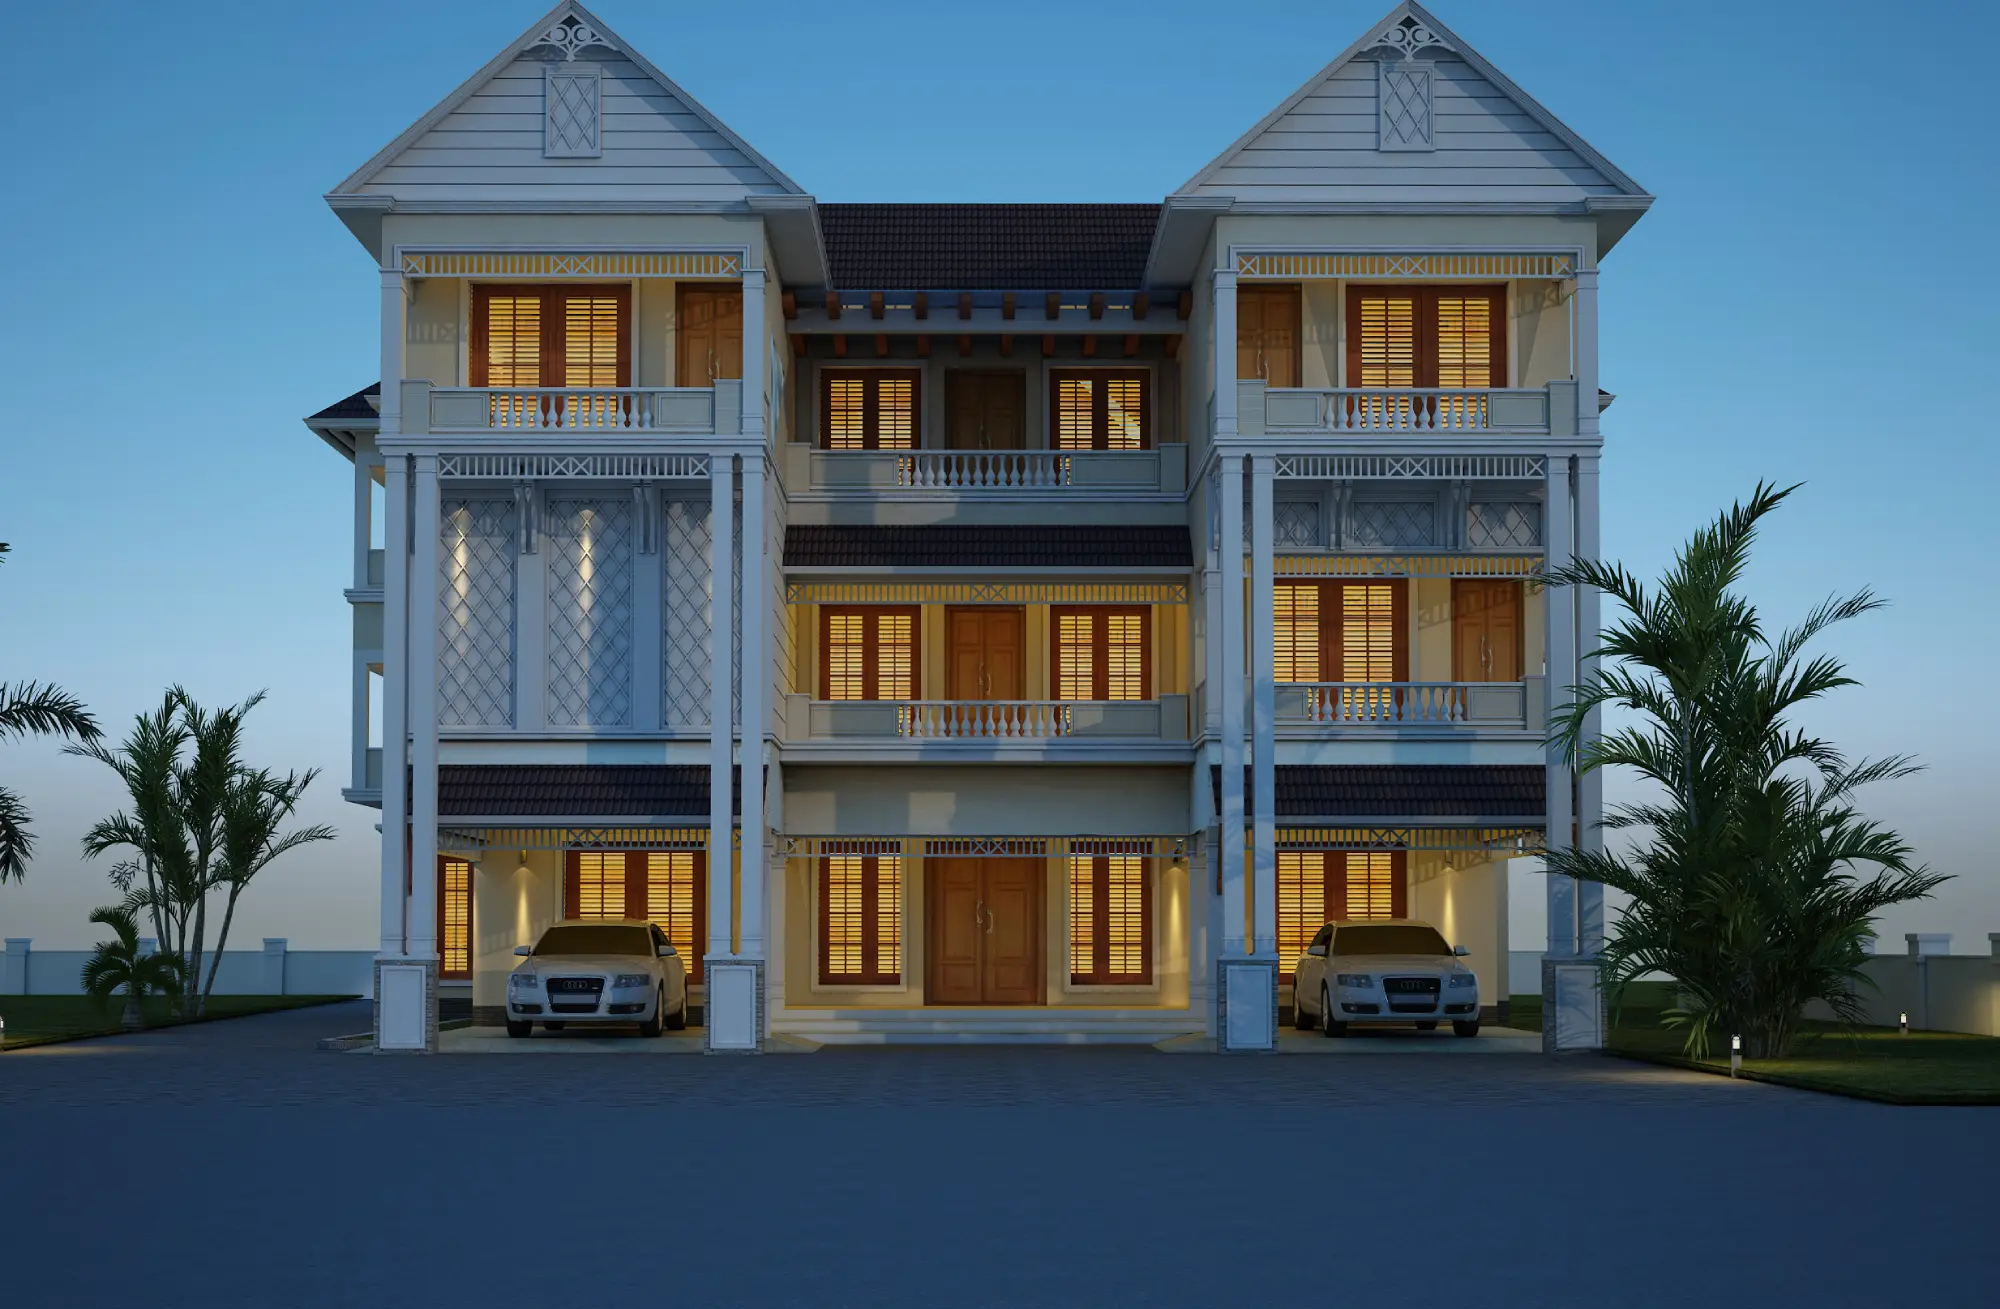 A luxurious home with excellent design and exterior lighting